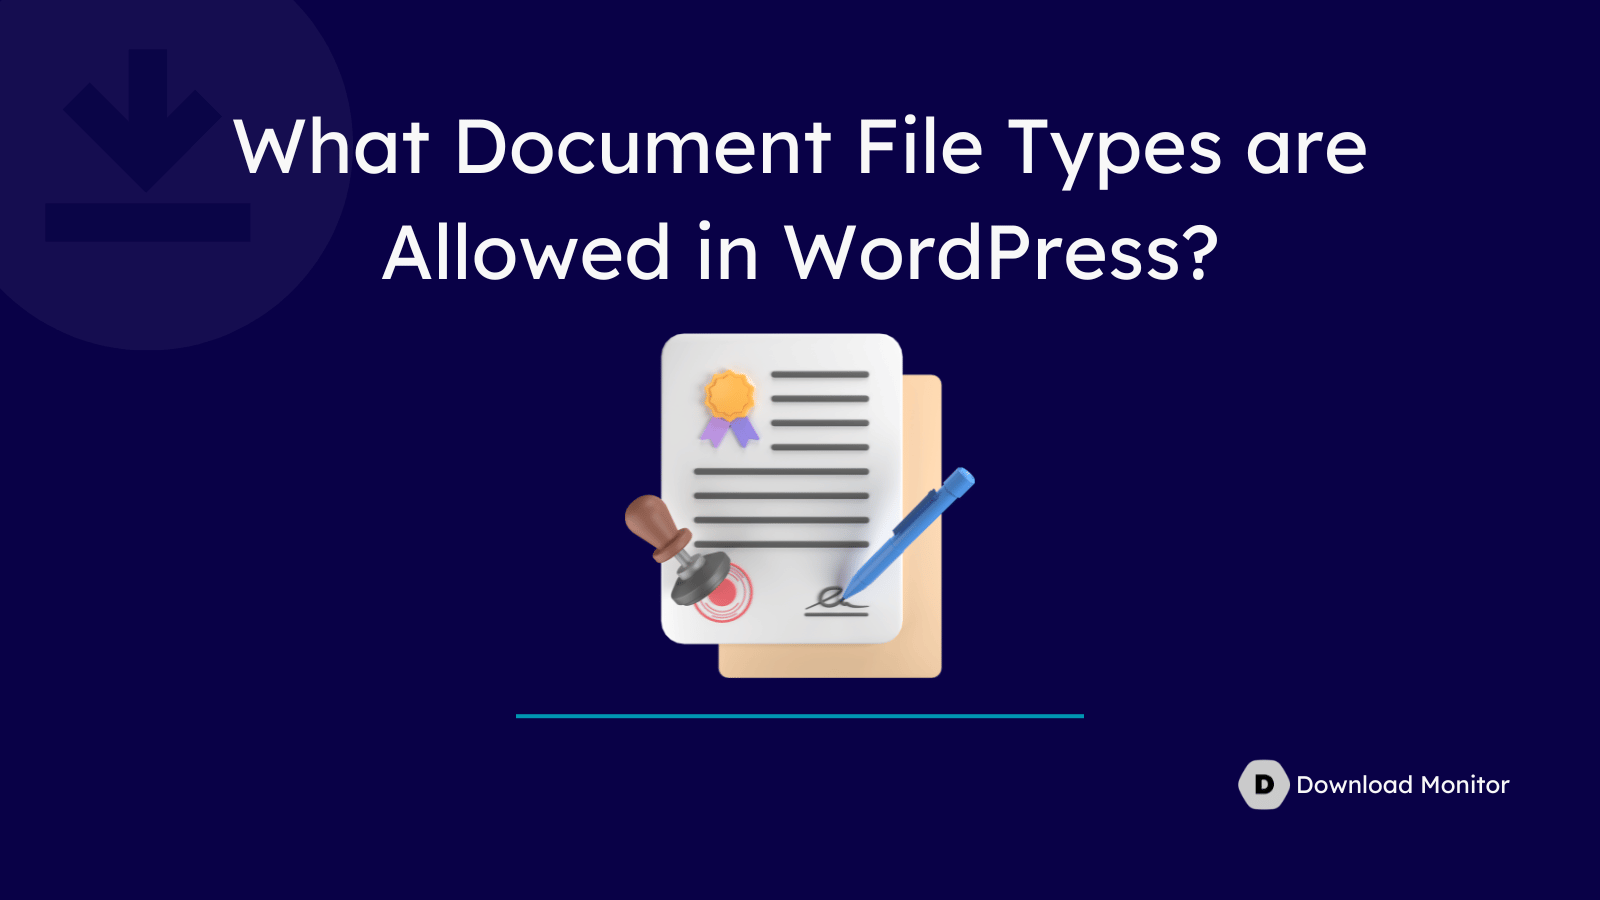 What Document File Types are Allowed in WordPress- WordPress Allowed File Types